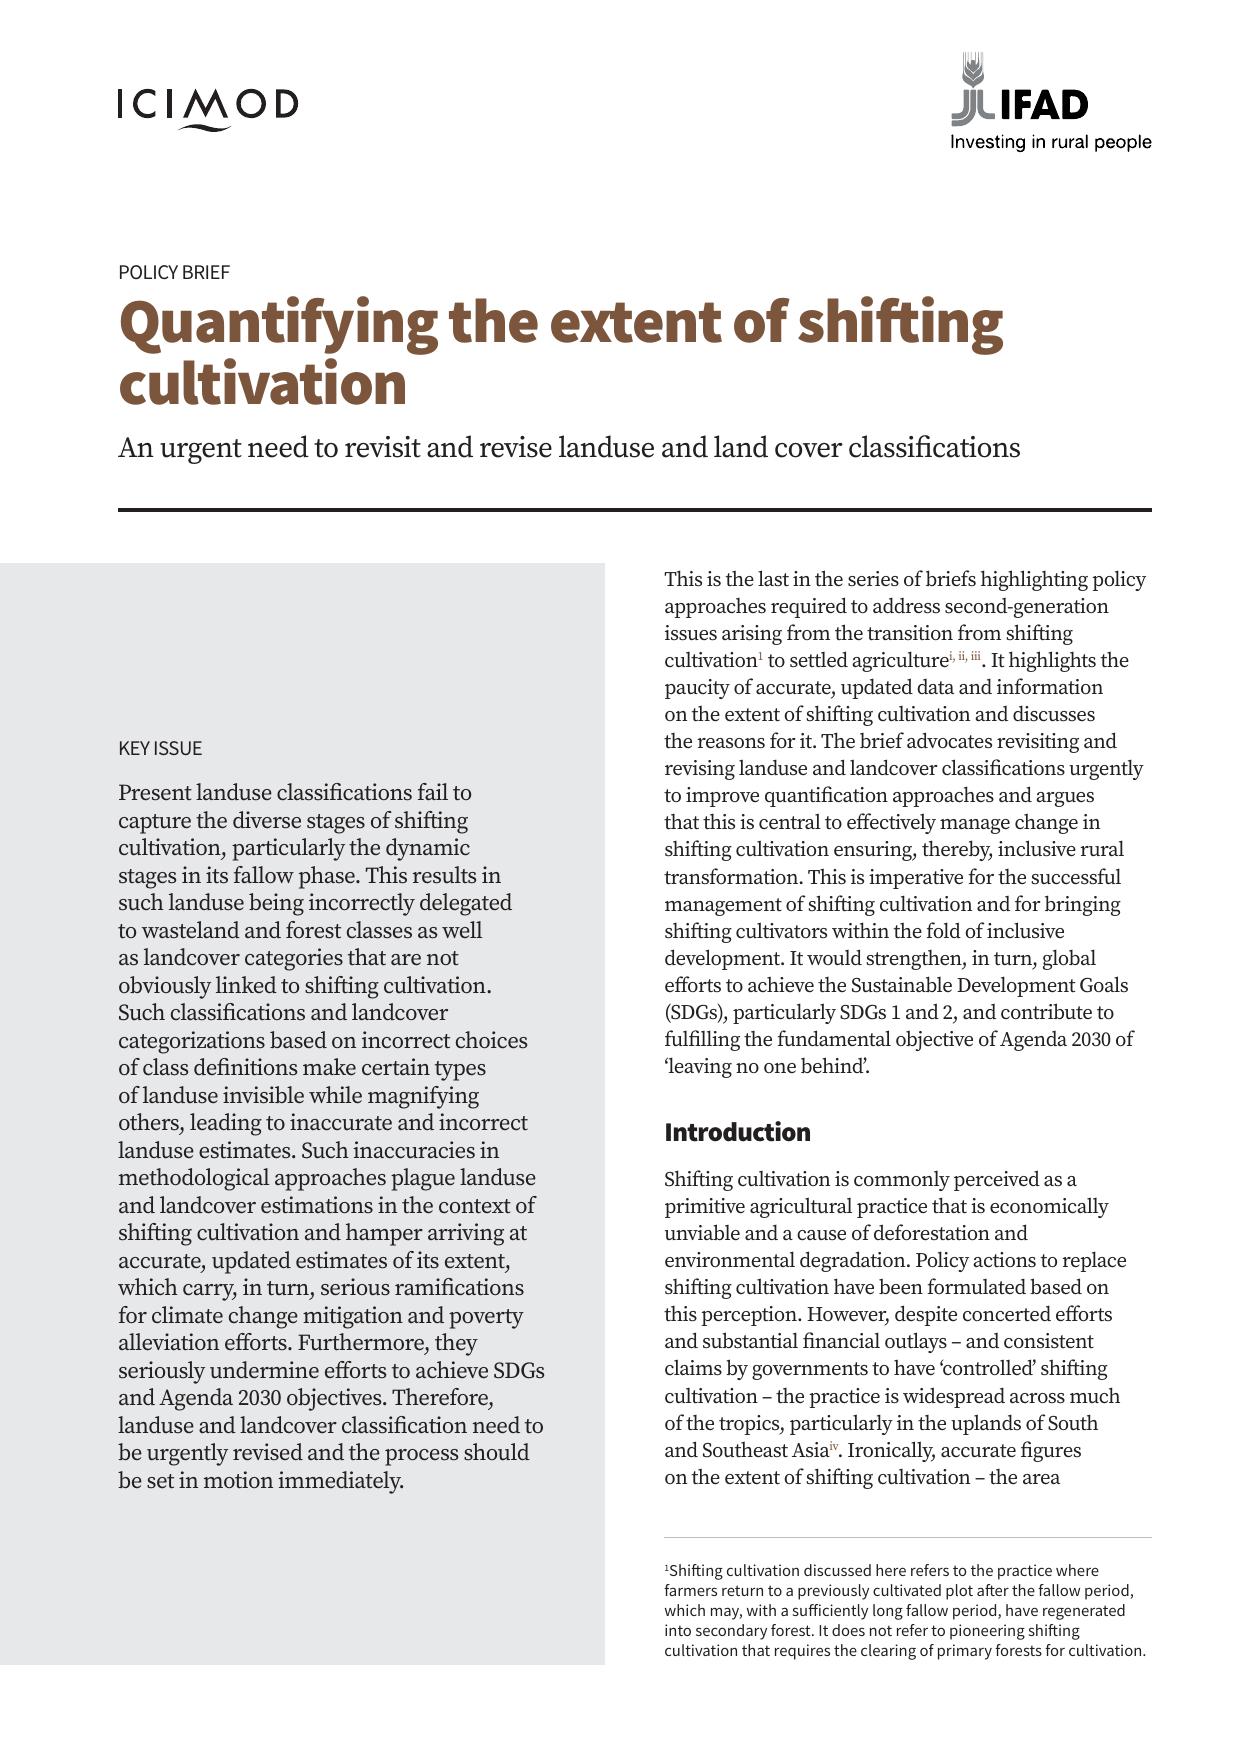 quantifying-the-extent-of-shifting-cultivation